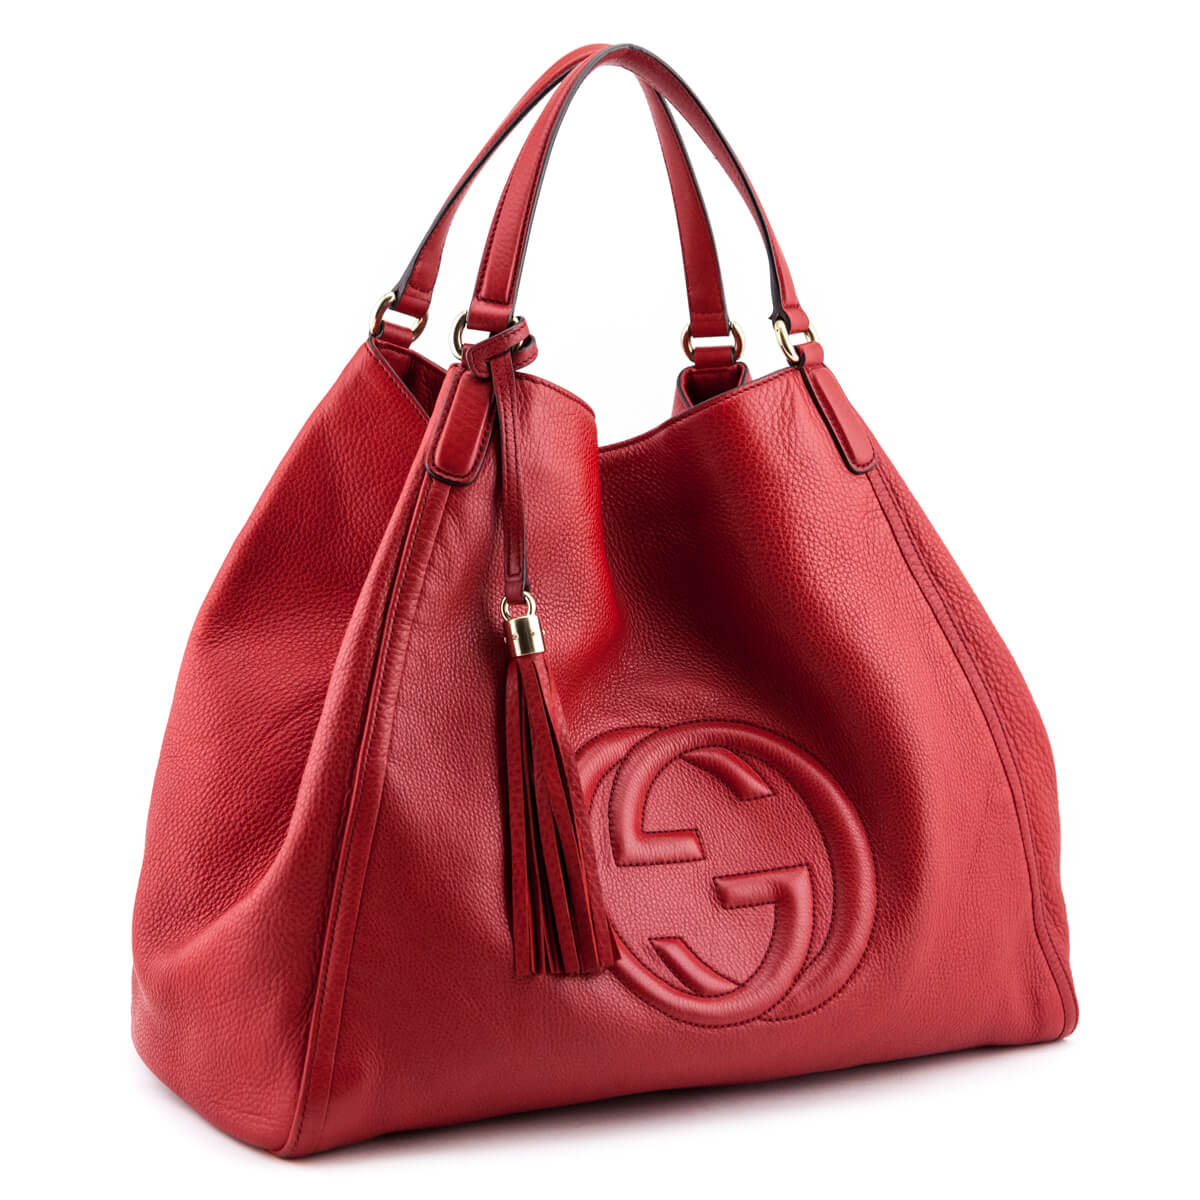 Gucci Red Grained Leather Large Soho Tote Bag - Preowned Gucci Canada